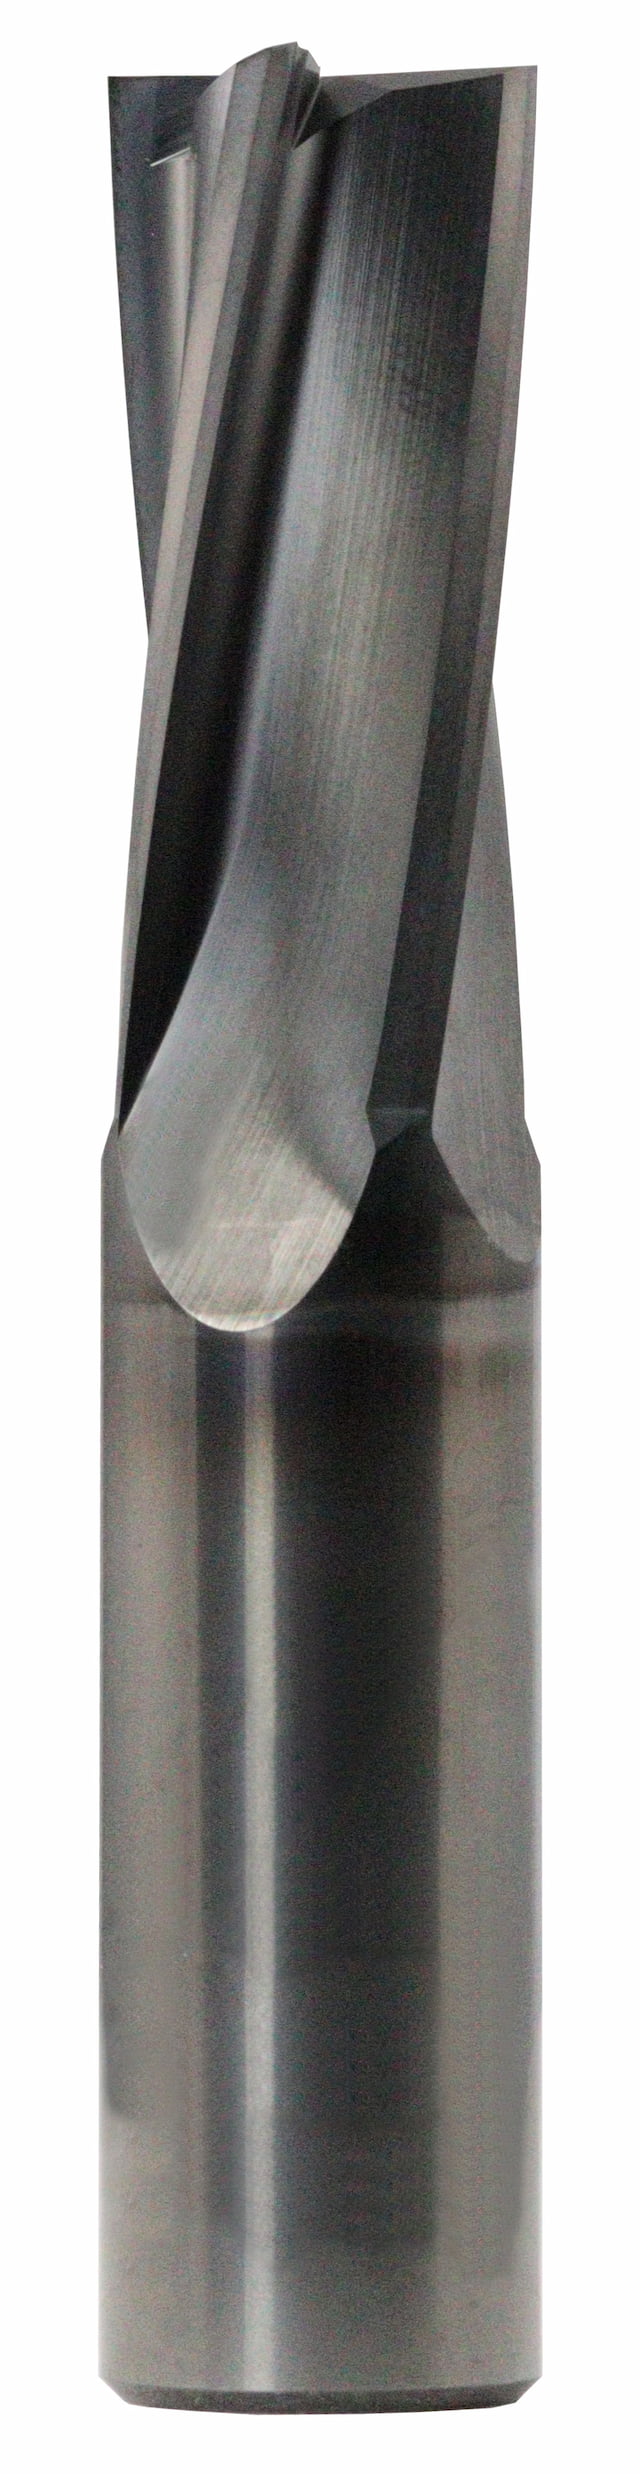 6.00mm Dia, 4 Flute, Square End End Mill - 83056